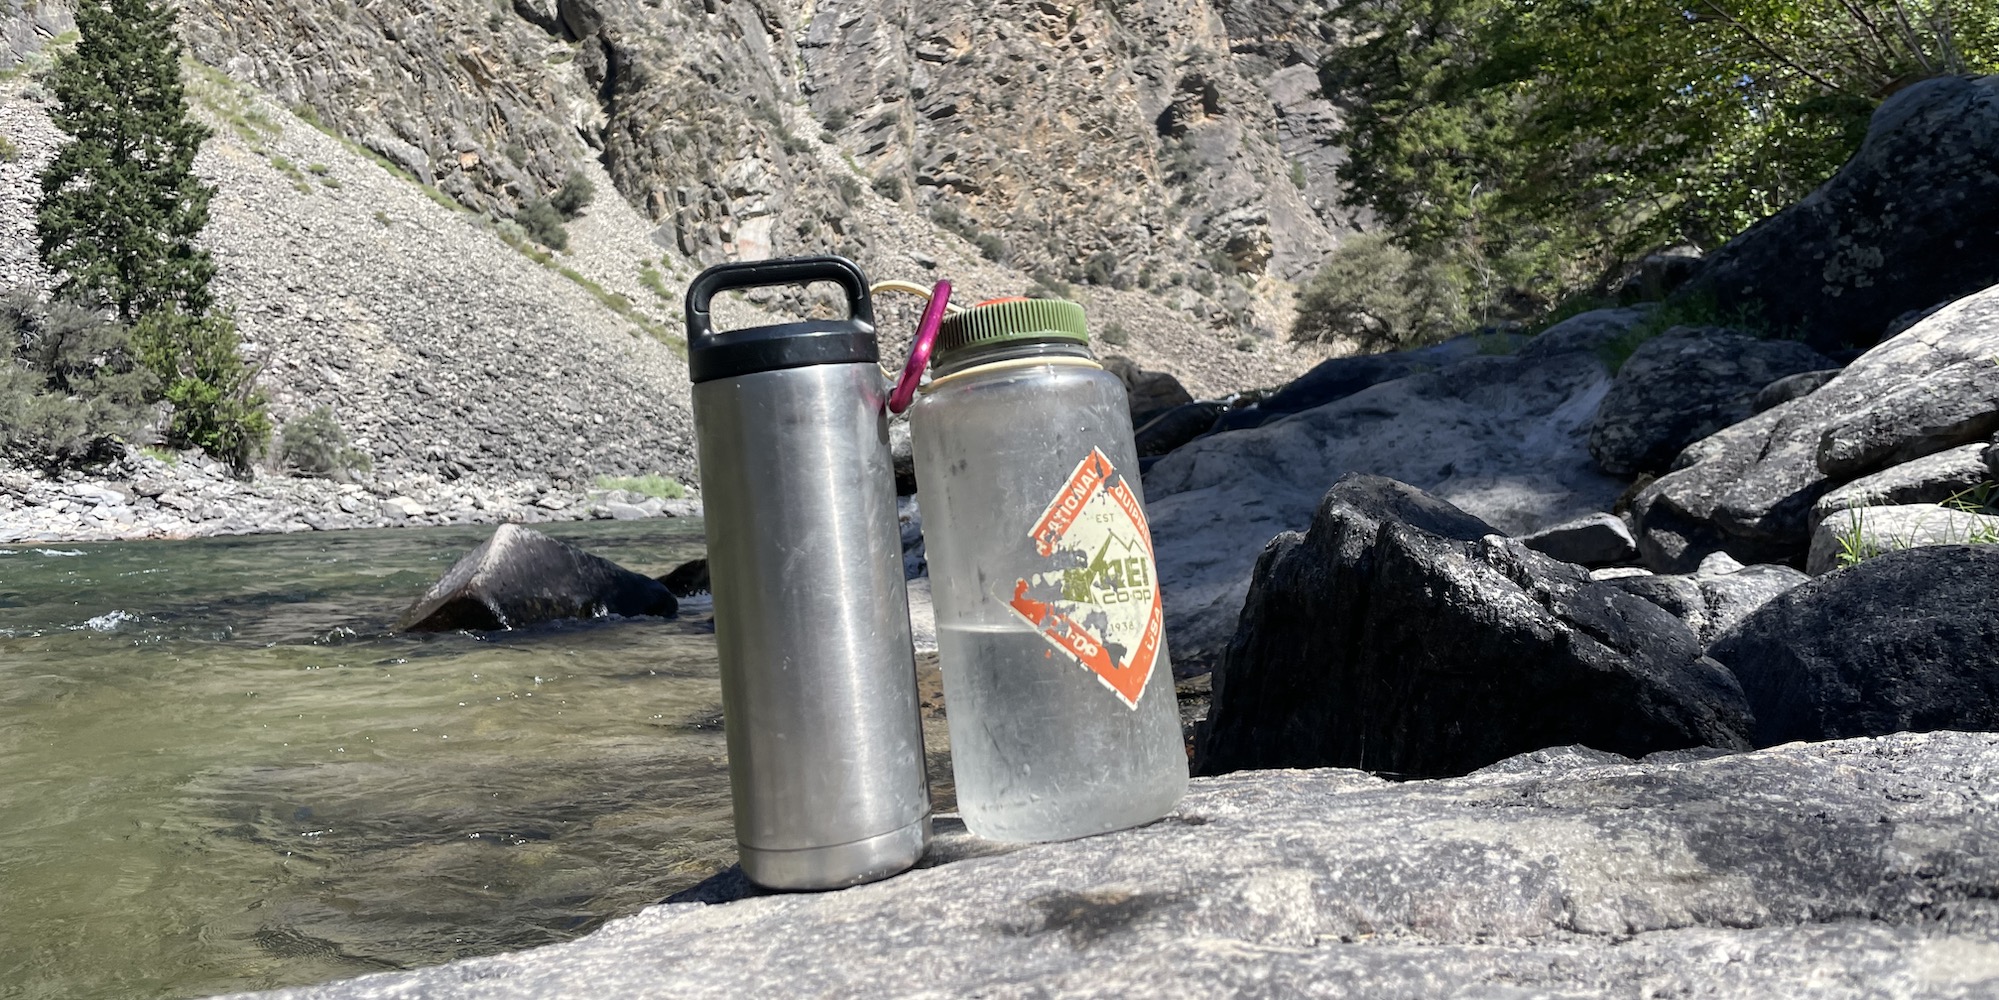 Insulated Yeti water bottle next to a Nalgene water bottle on a rock along the river